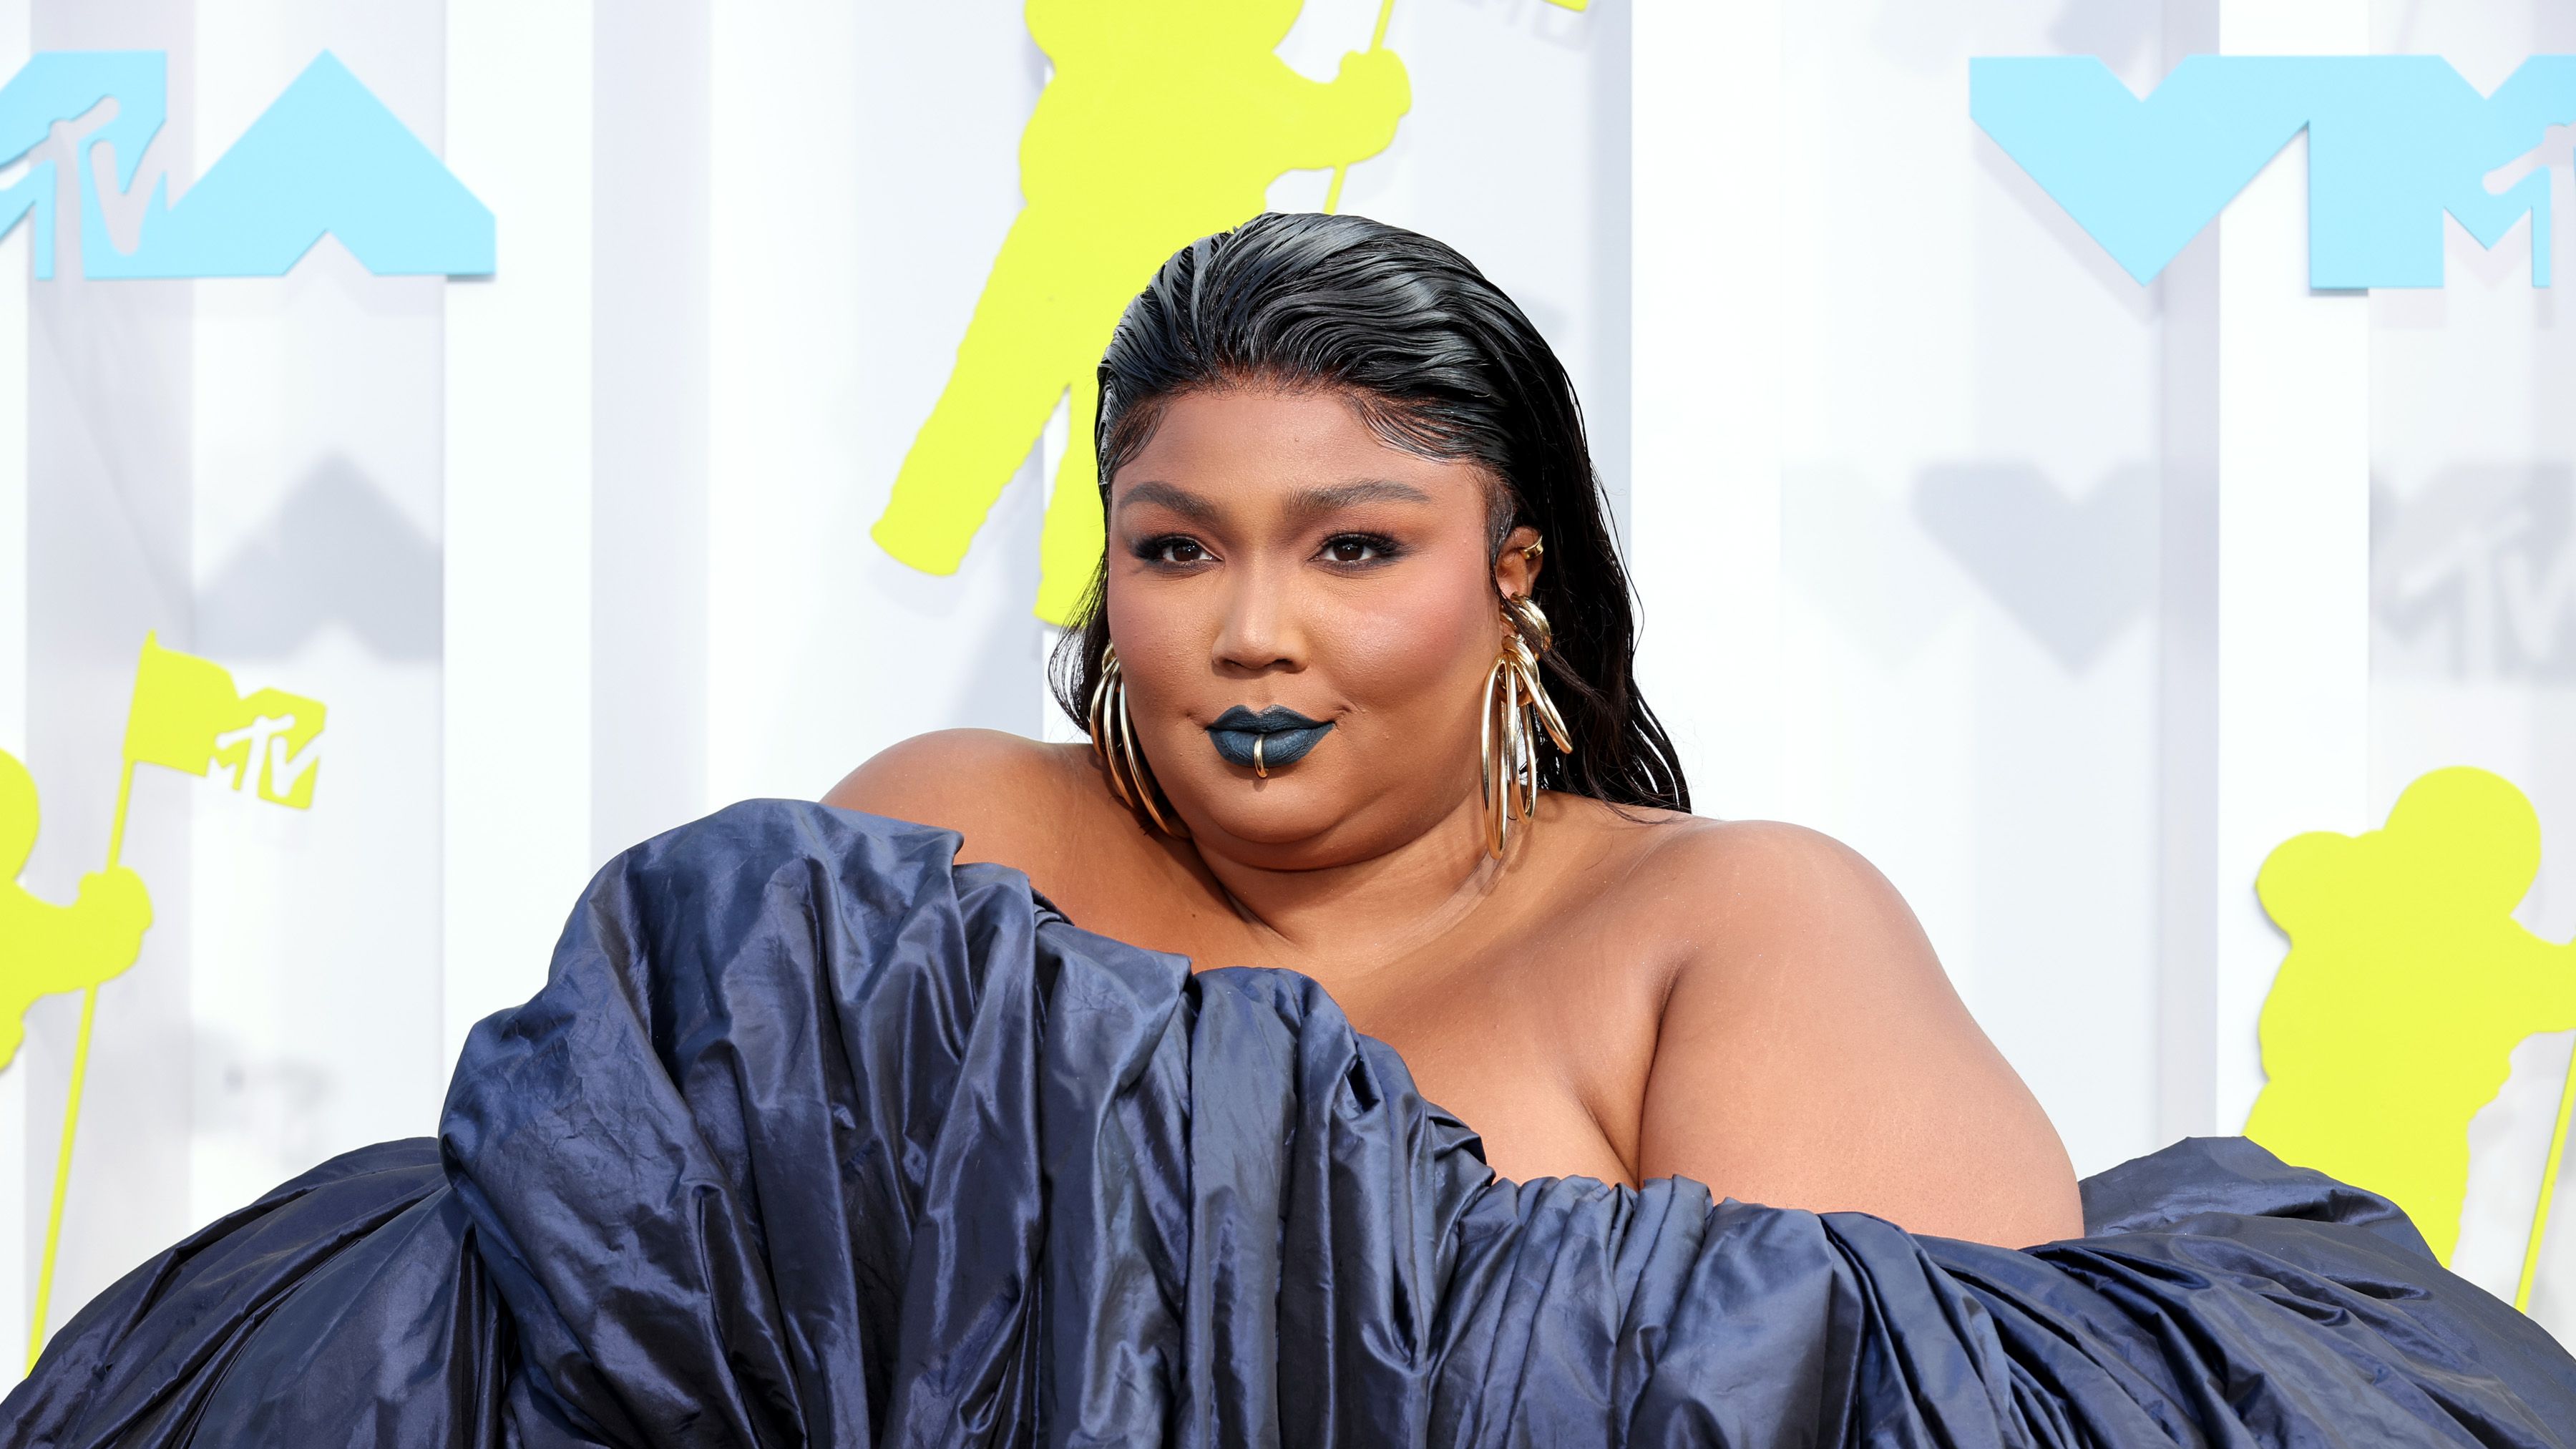 Lizzo Is Enchanting in a Billowing Iridescent Gown at the 2022 MTV VMAs